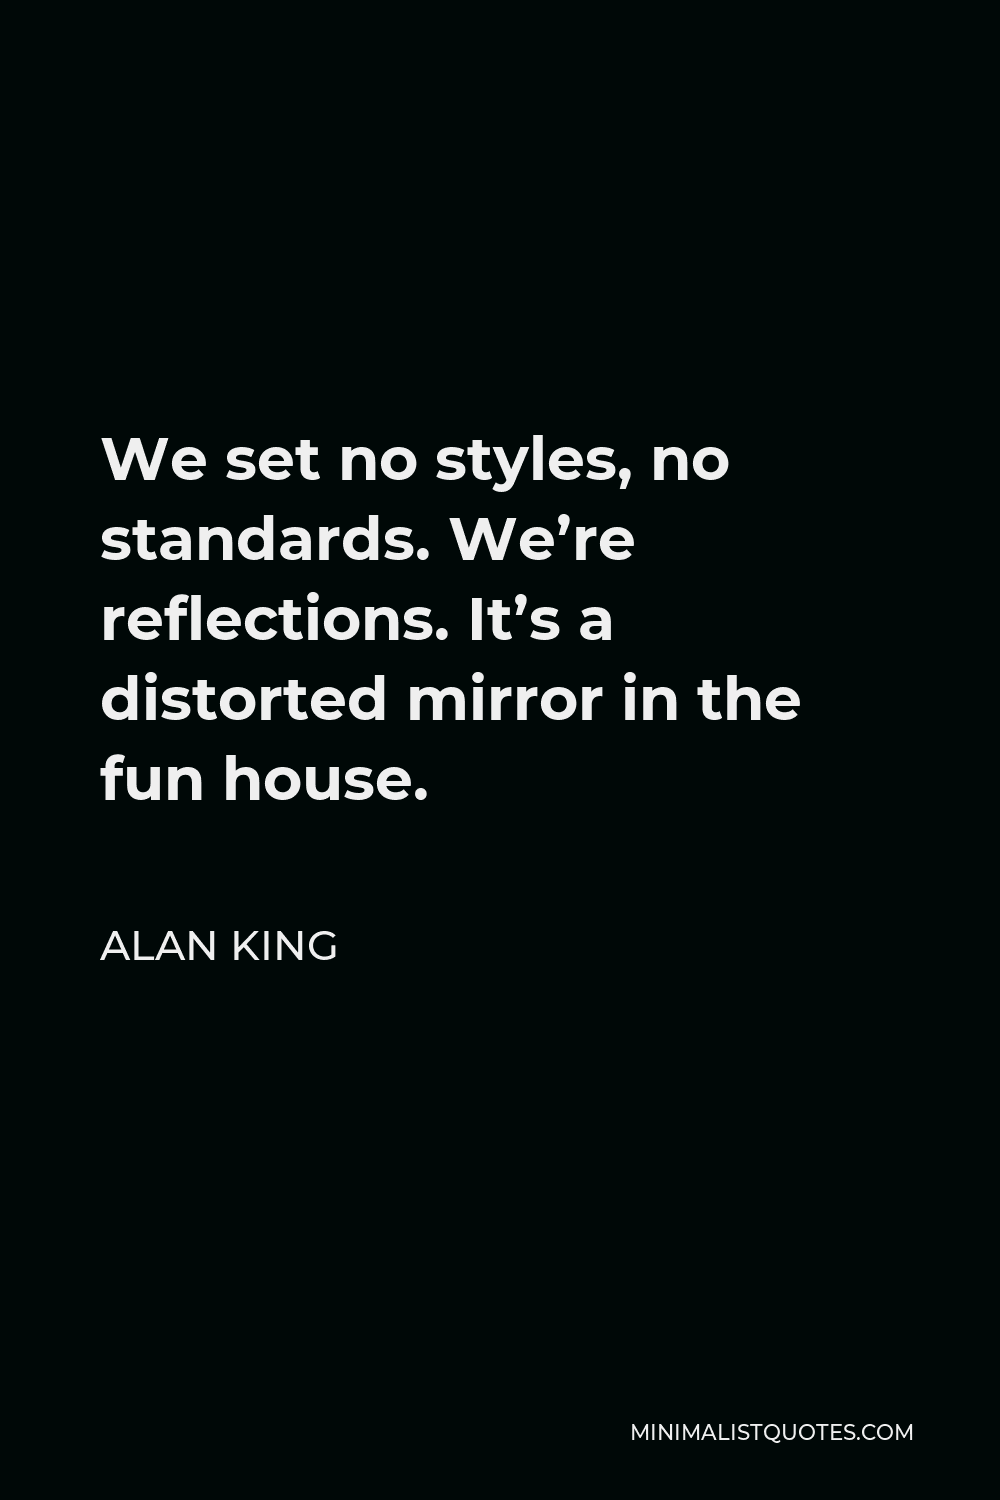 Alan King Quote - We set no styles, no standards. We’re reflections. It’s a distorted mirror in the fun house.